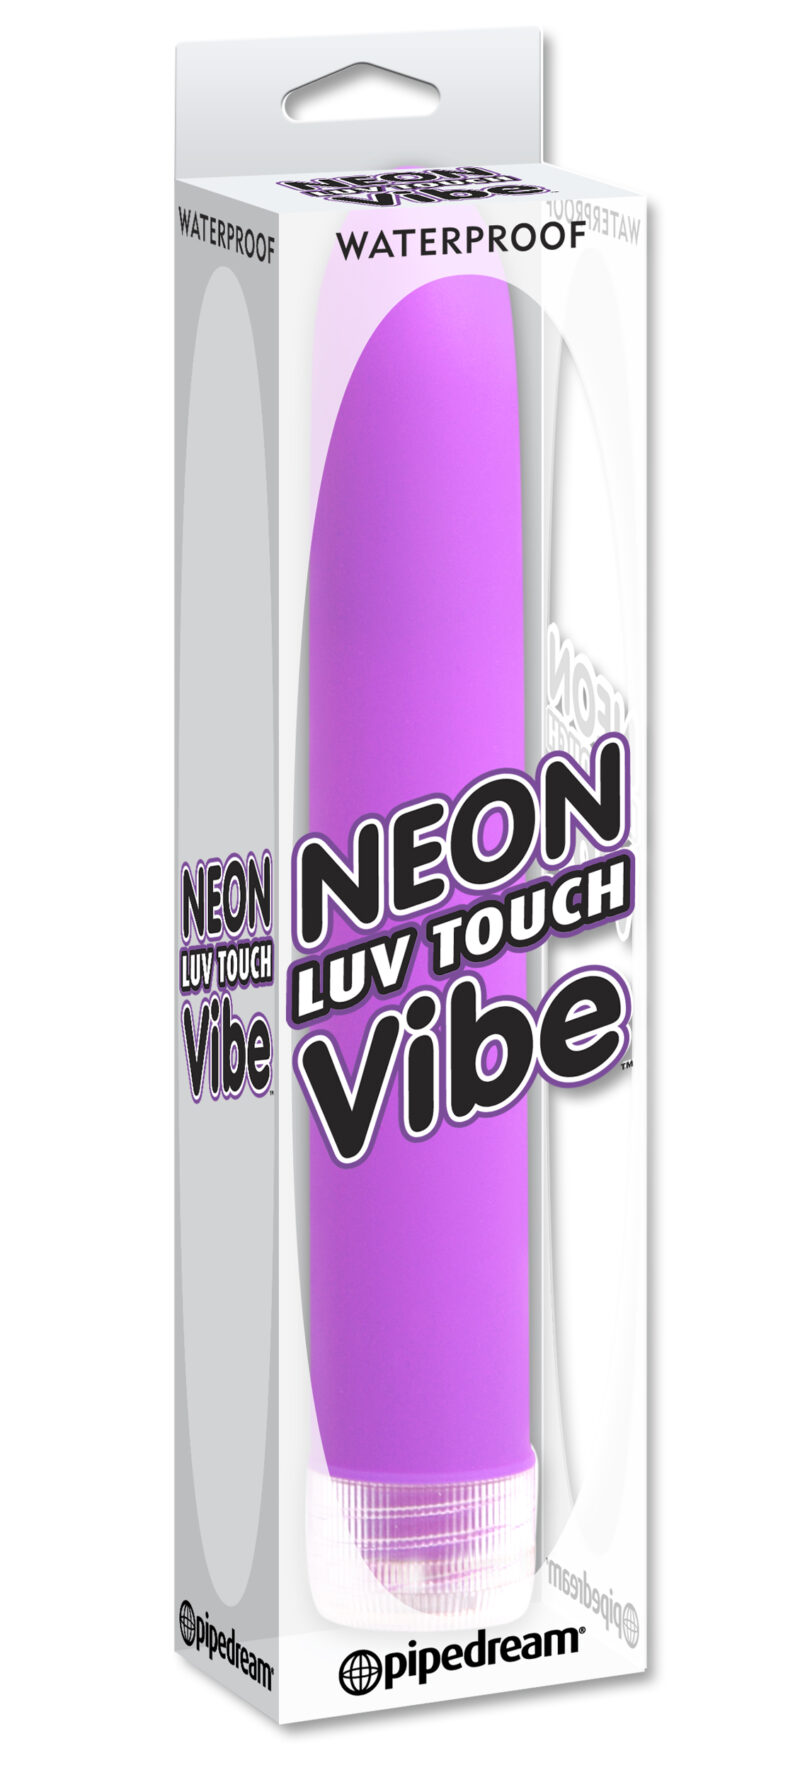 Pipedream Neon Luv Touch Vibe Purple